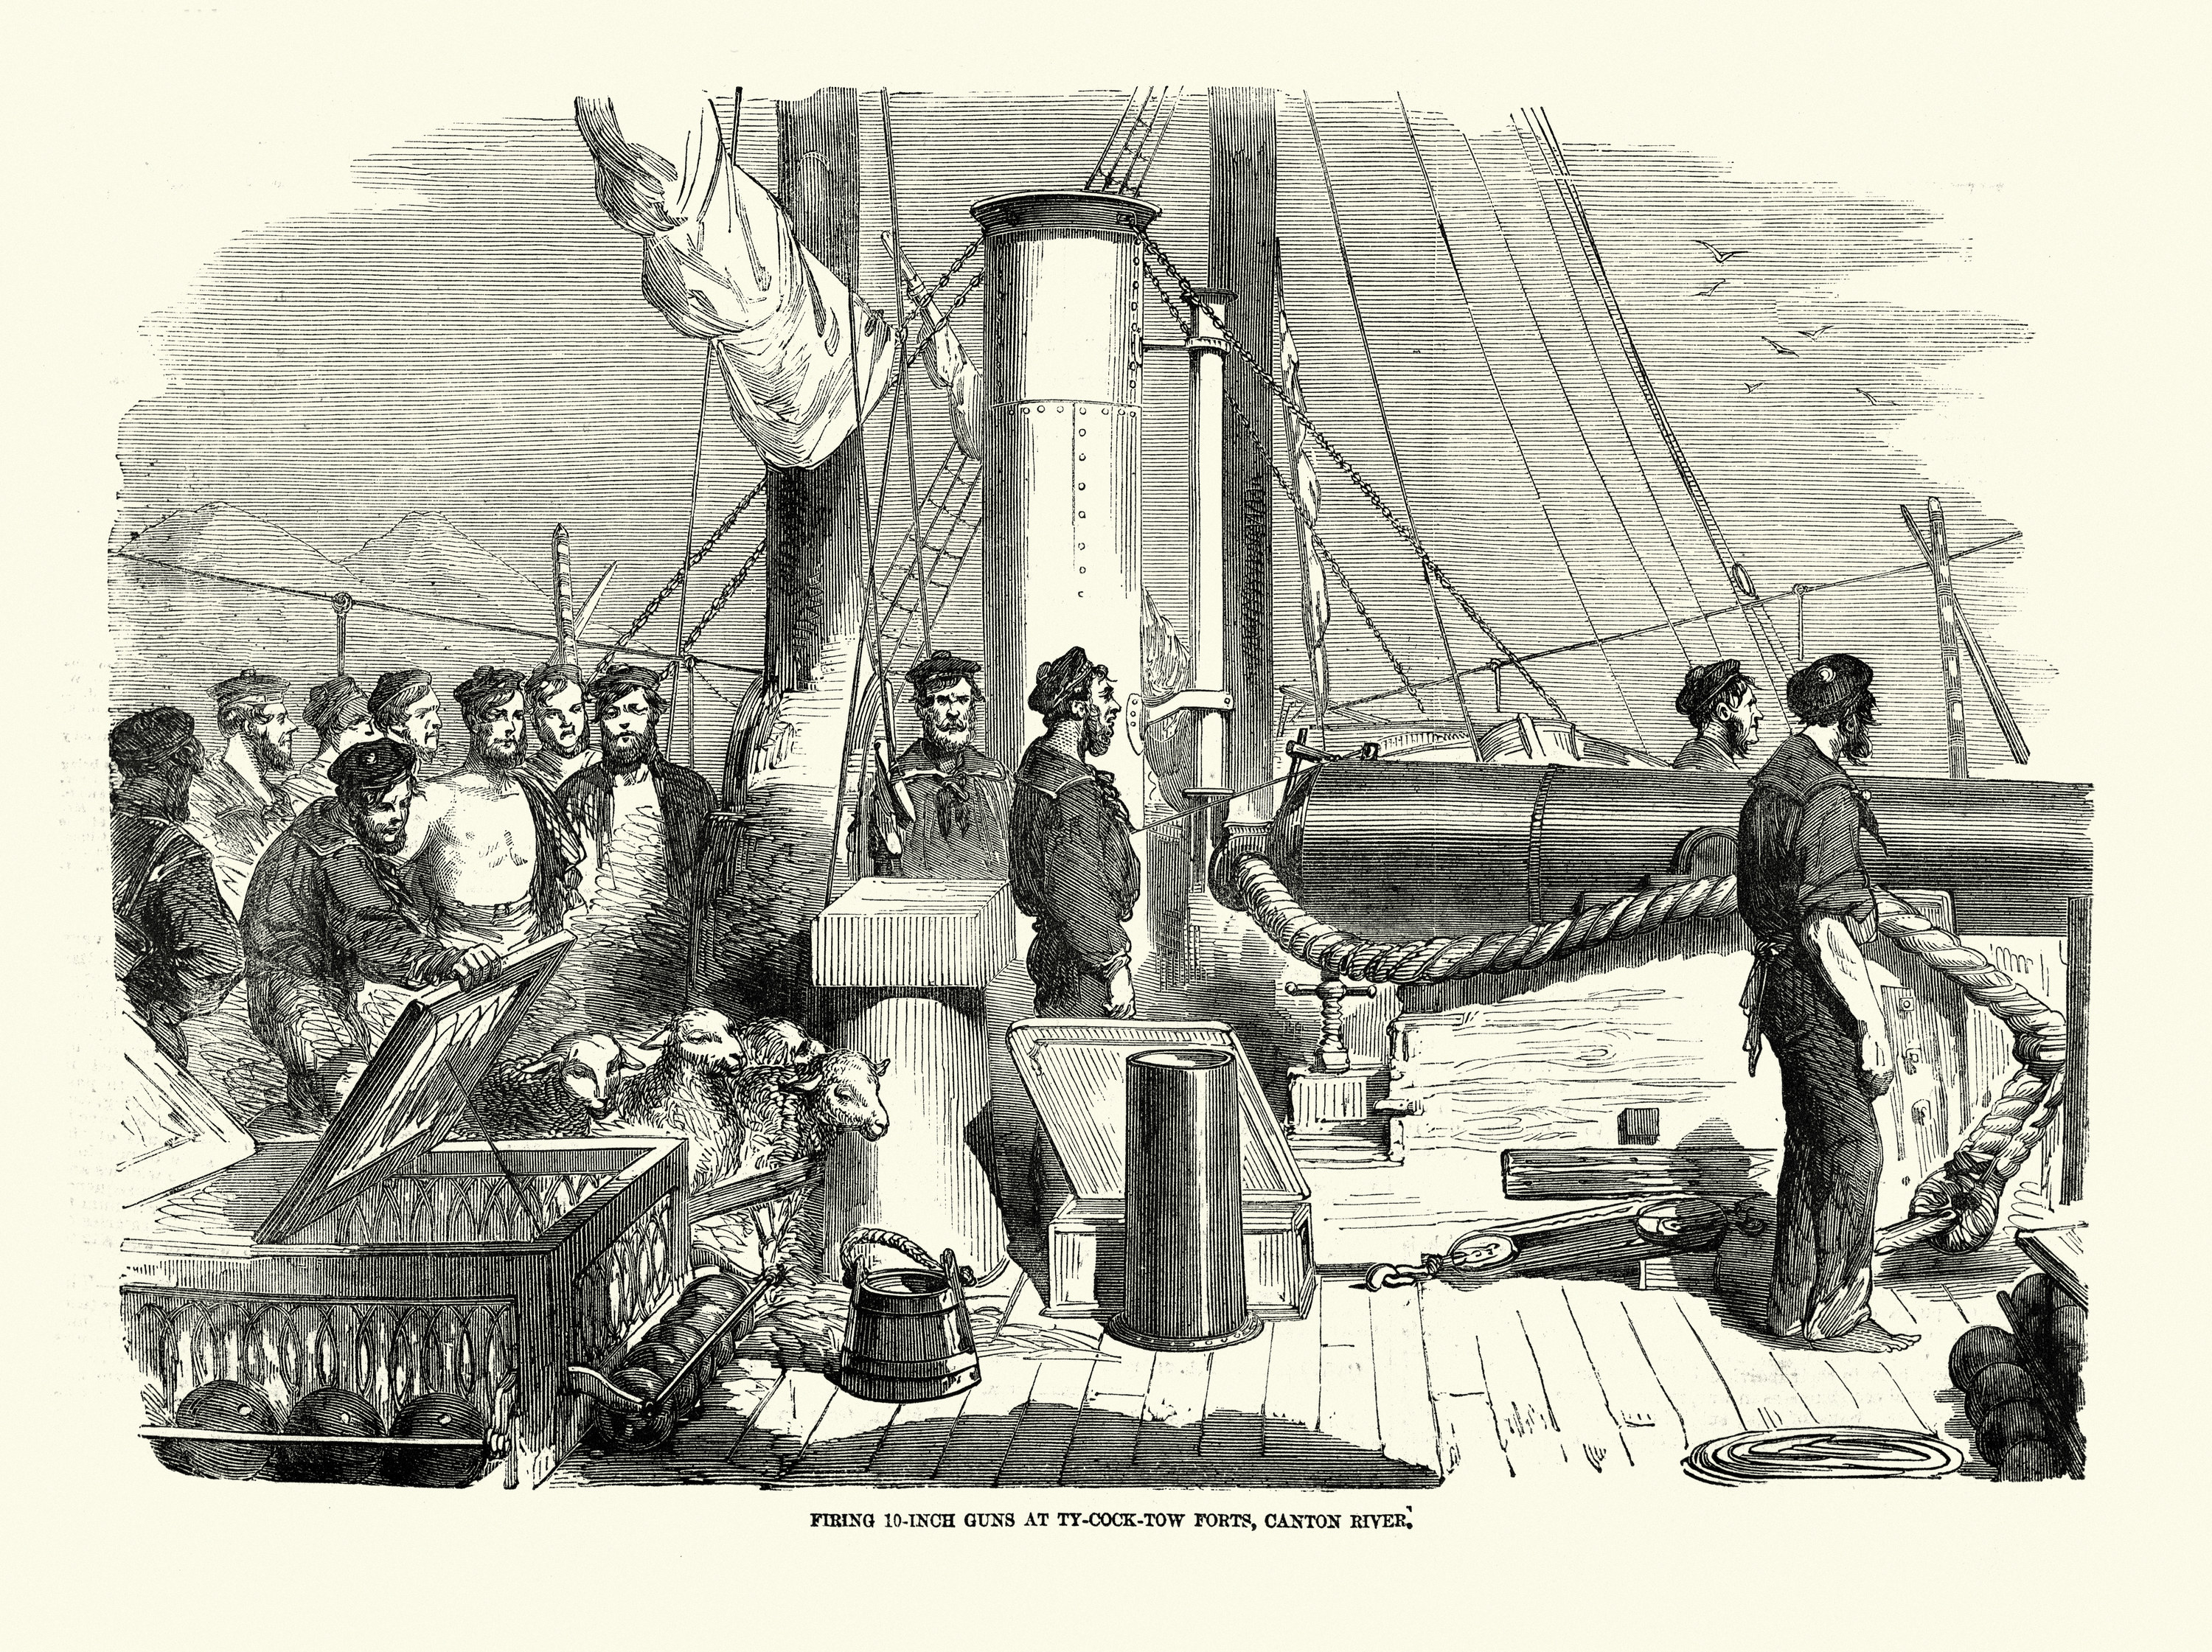 A black and white illustration of a ship with a cannon ready to be fired